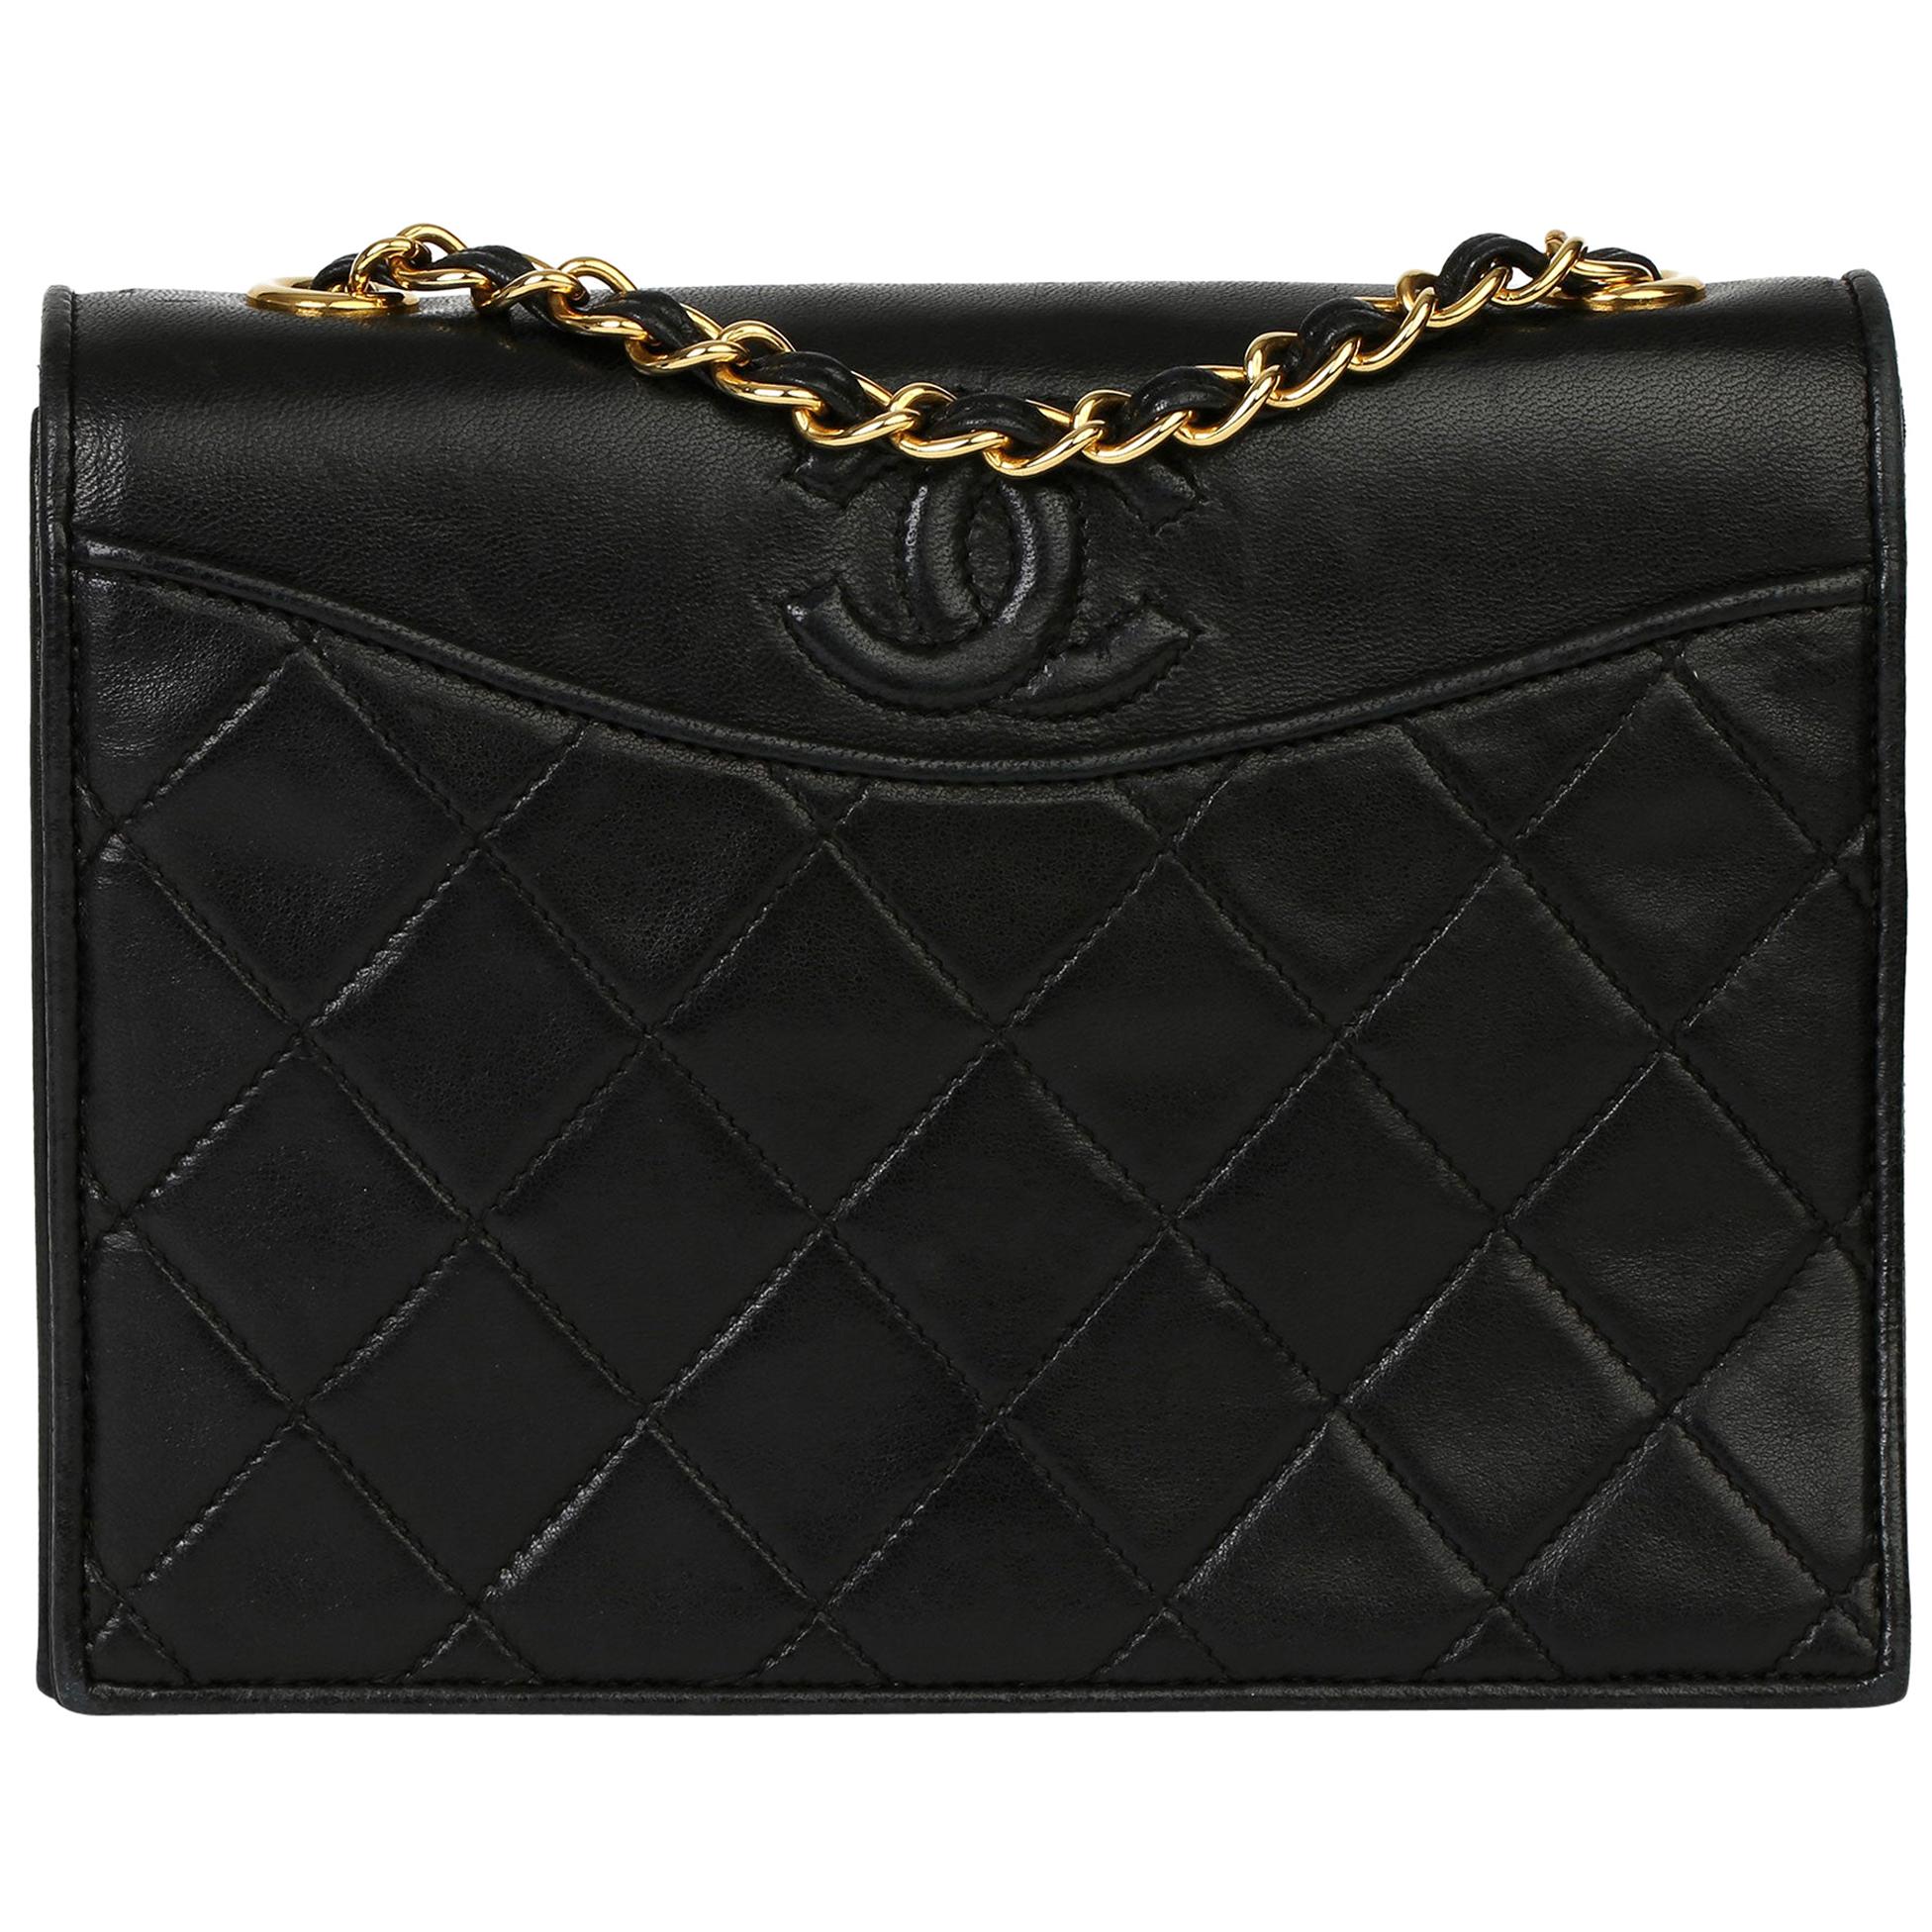 1989 Chanel Black Quilted Lambskin Vintage Timeless Single Flap Bag 